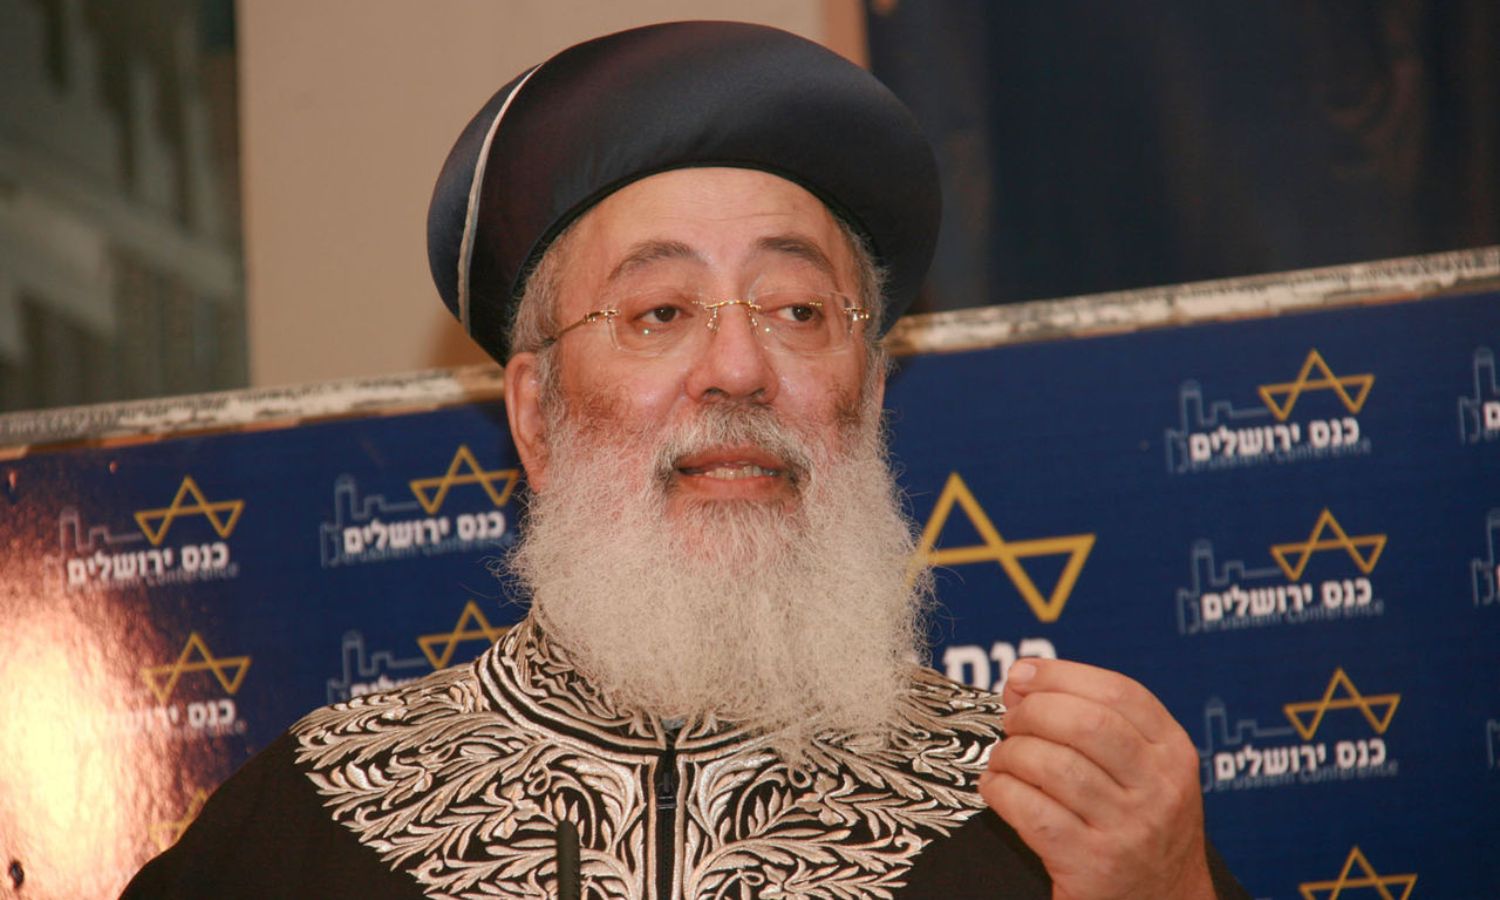 Jerusalem Chief Rabbi Condemns Harassment of Christian Clergy in Holy City